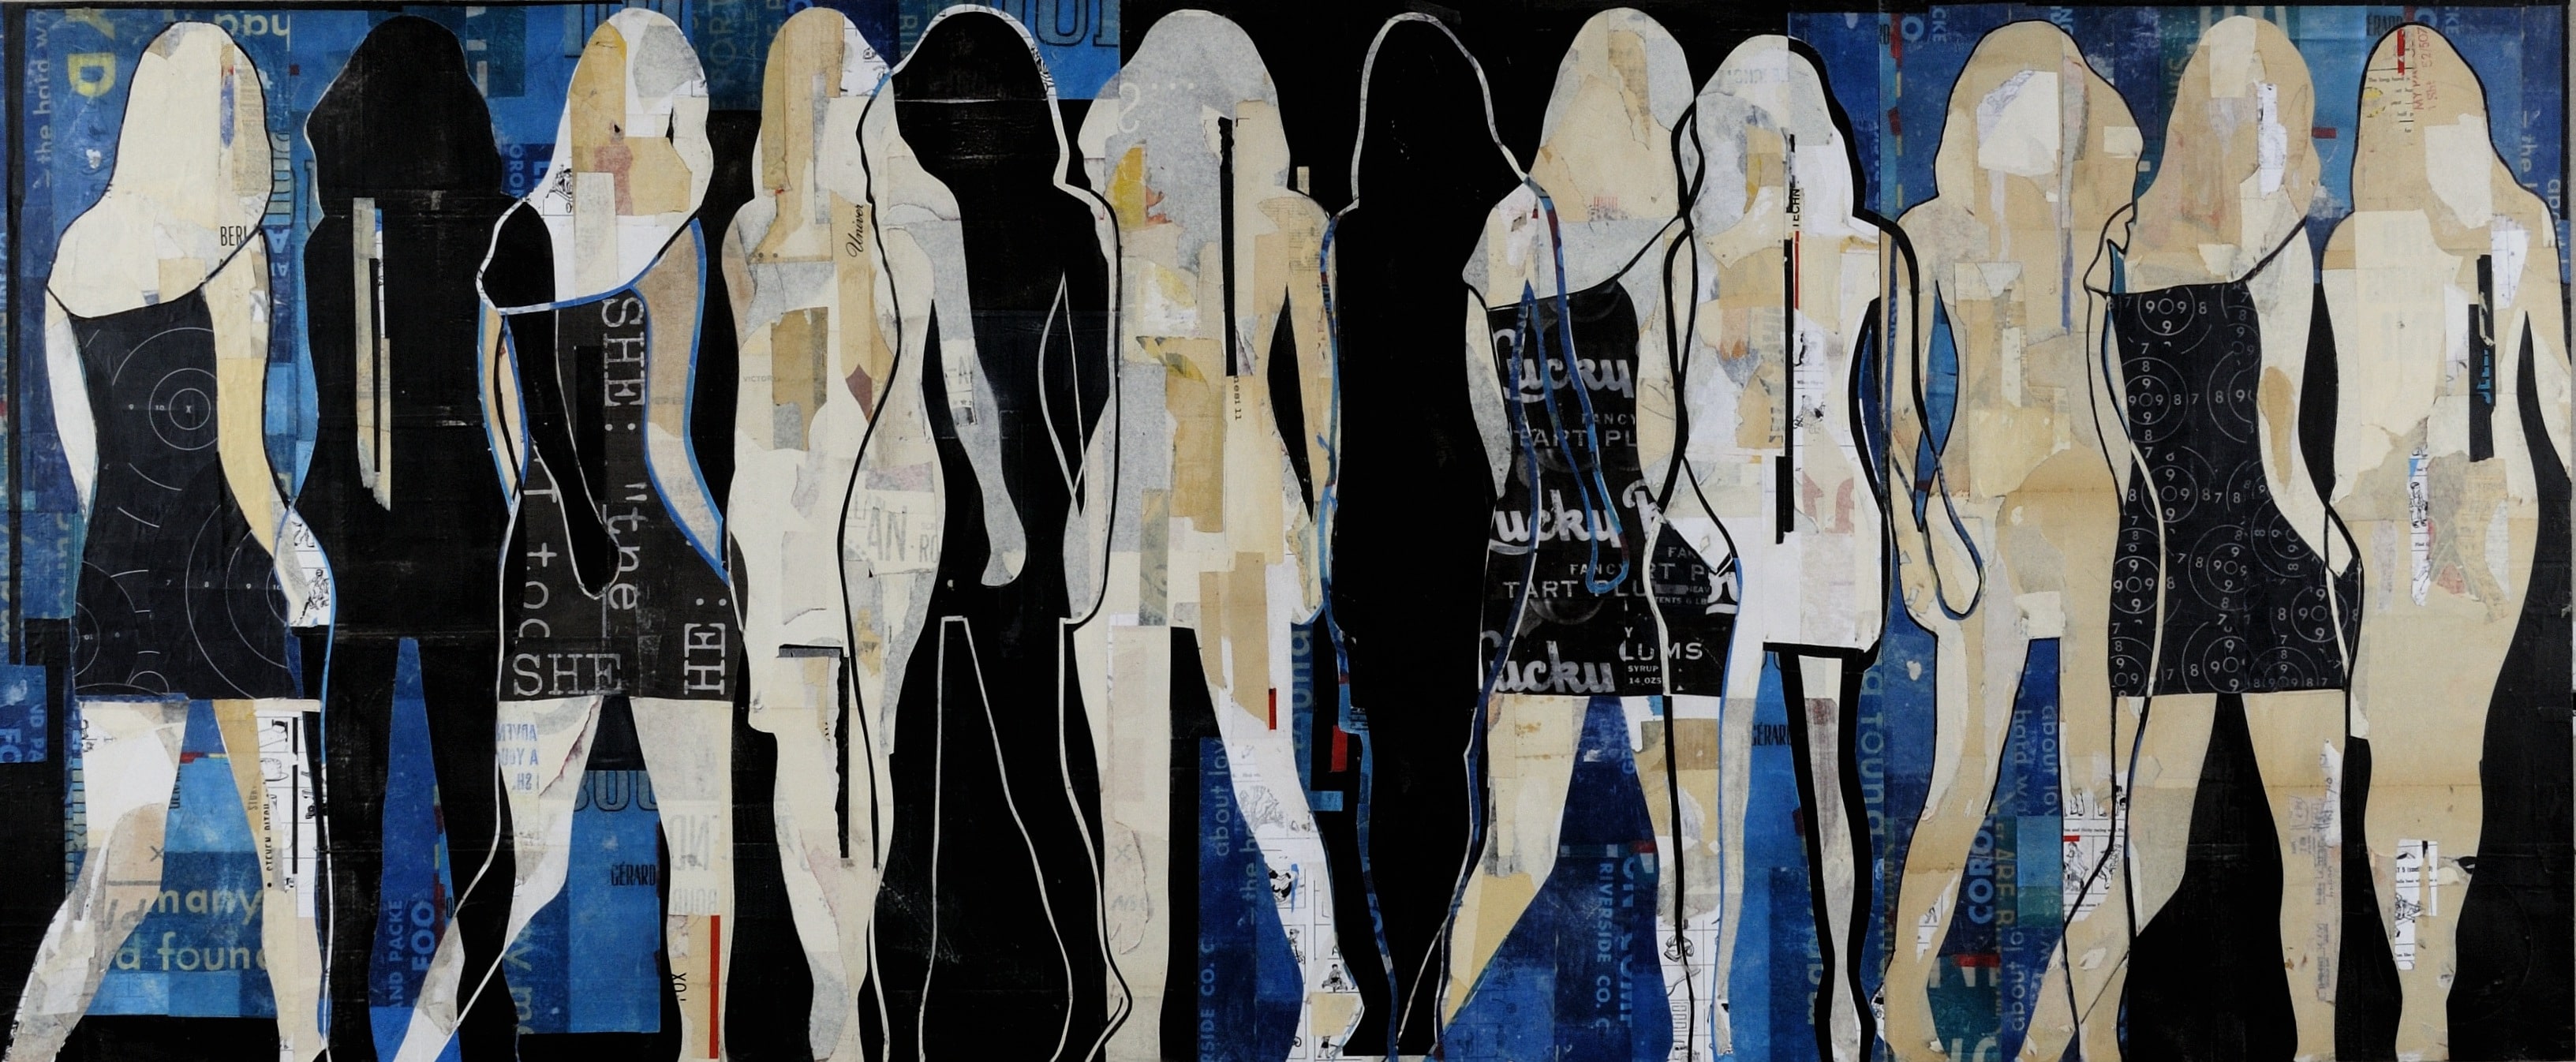 Jane Maxwell: Mixed Media & Collage Artist